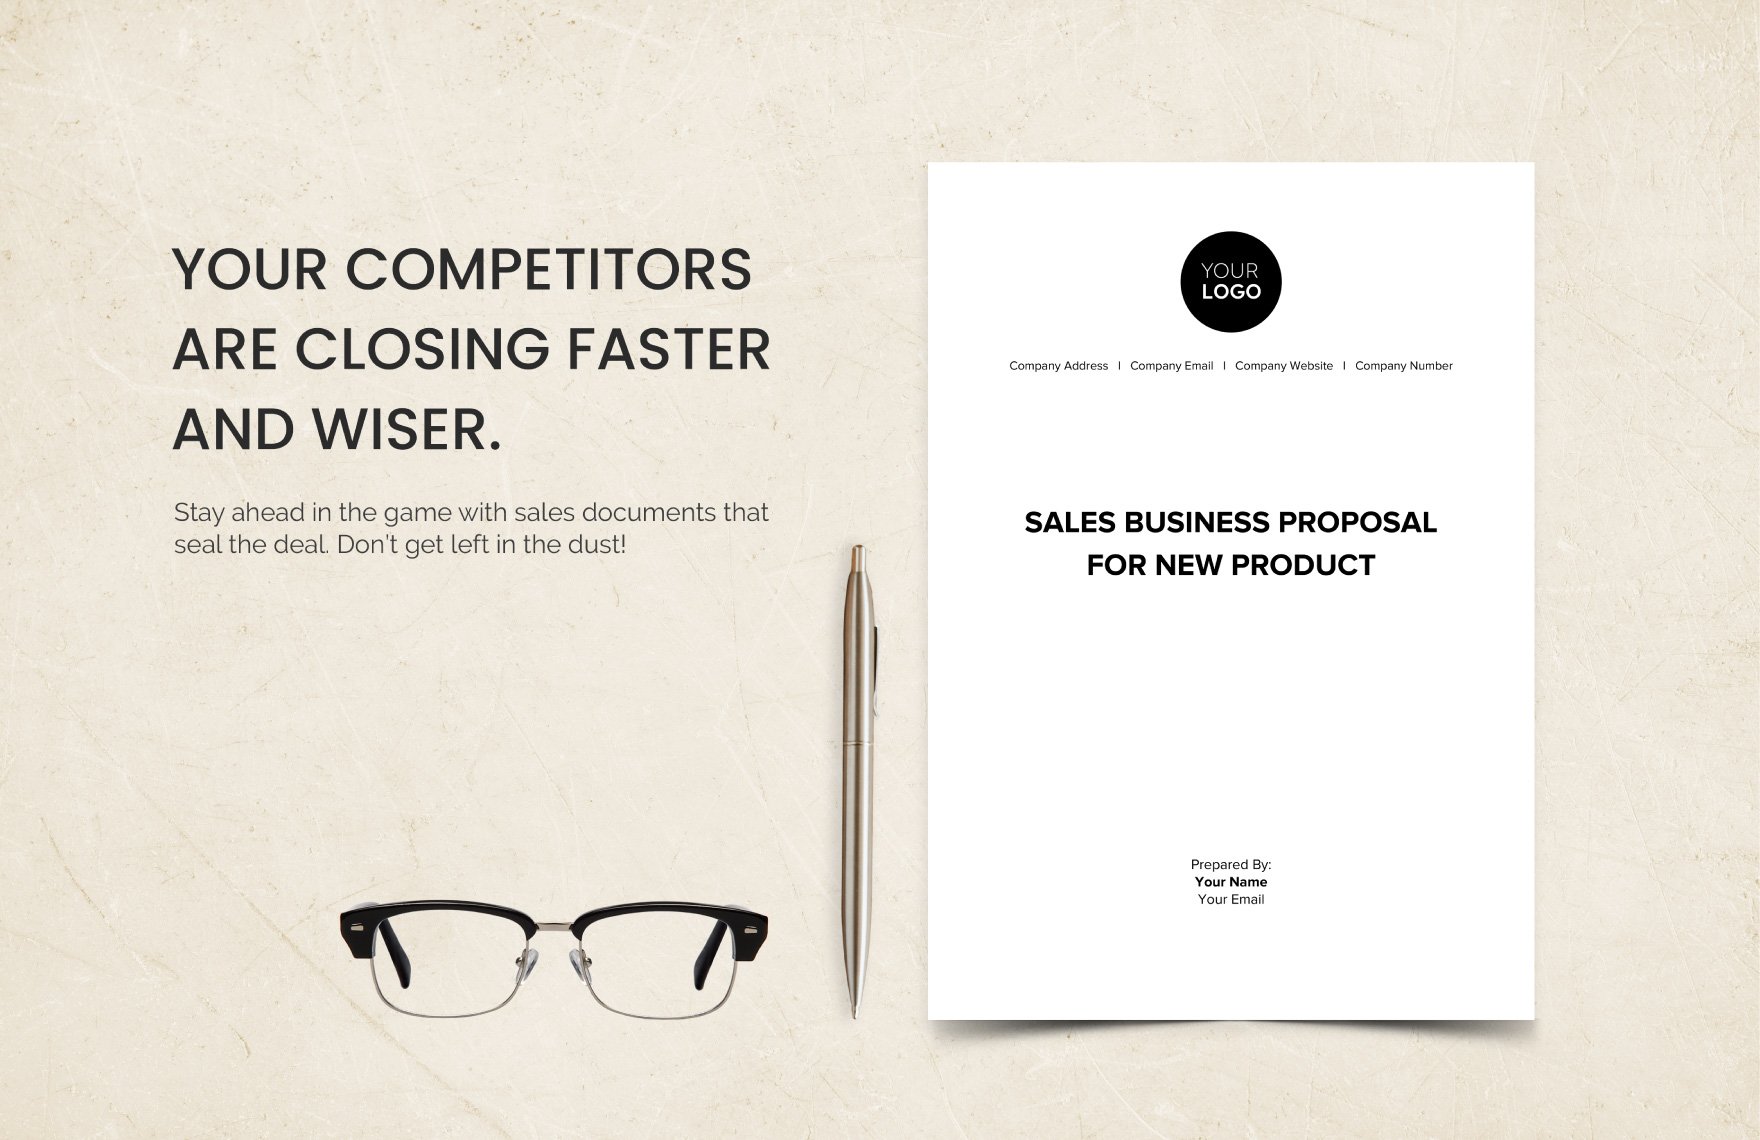 Sales Business Proposal for New Product Template